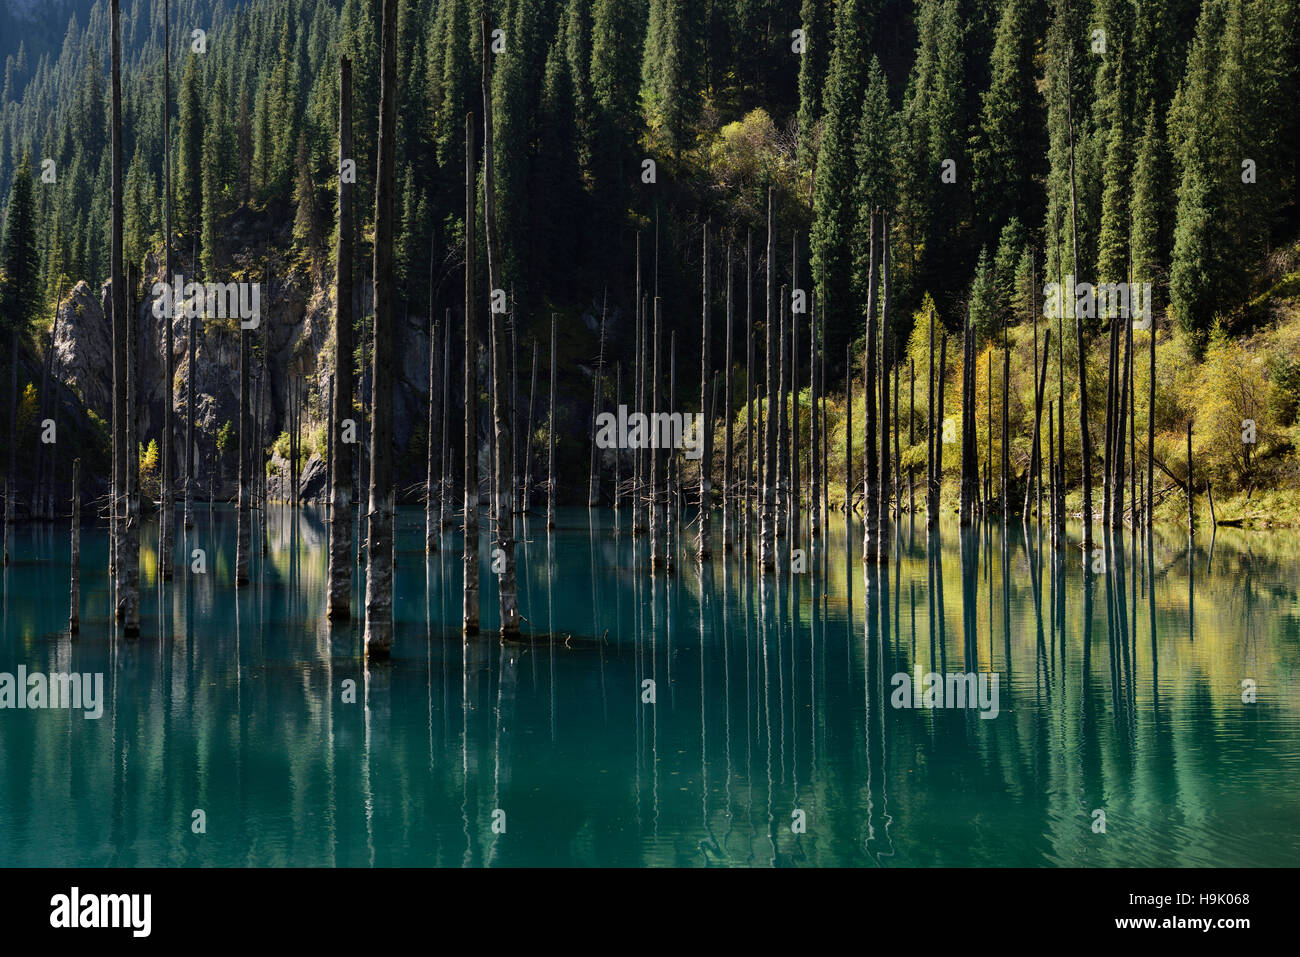 Asian Spruce tree reflections in turquoise water of Lake Kaindy with dead Spruce trees Kazakhstan Stock Photo